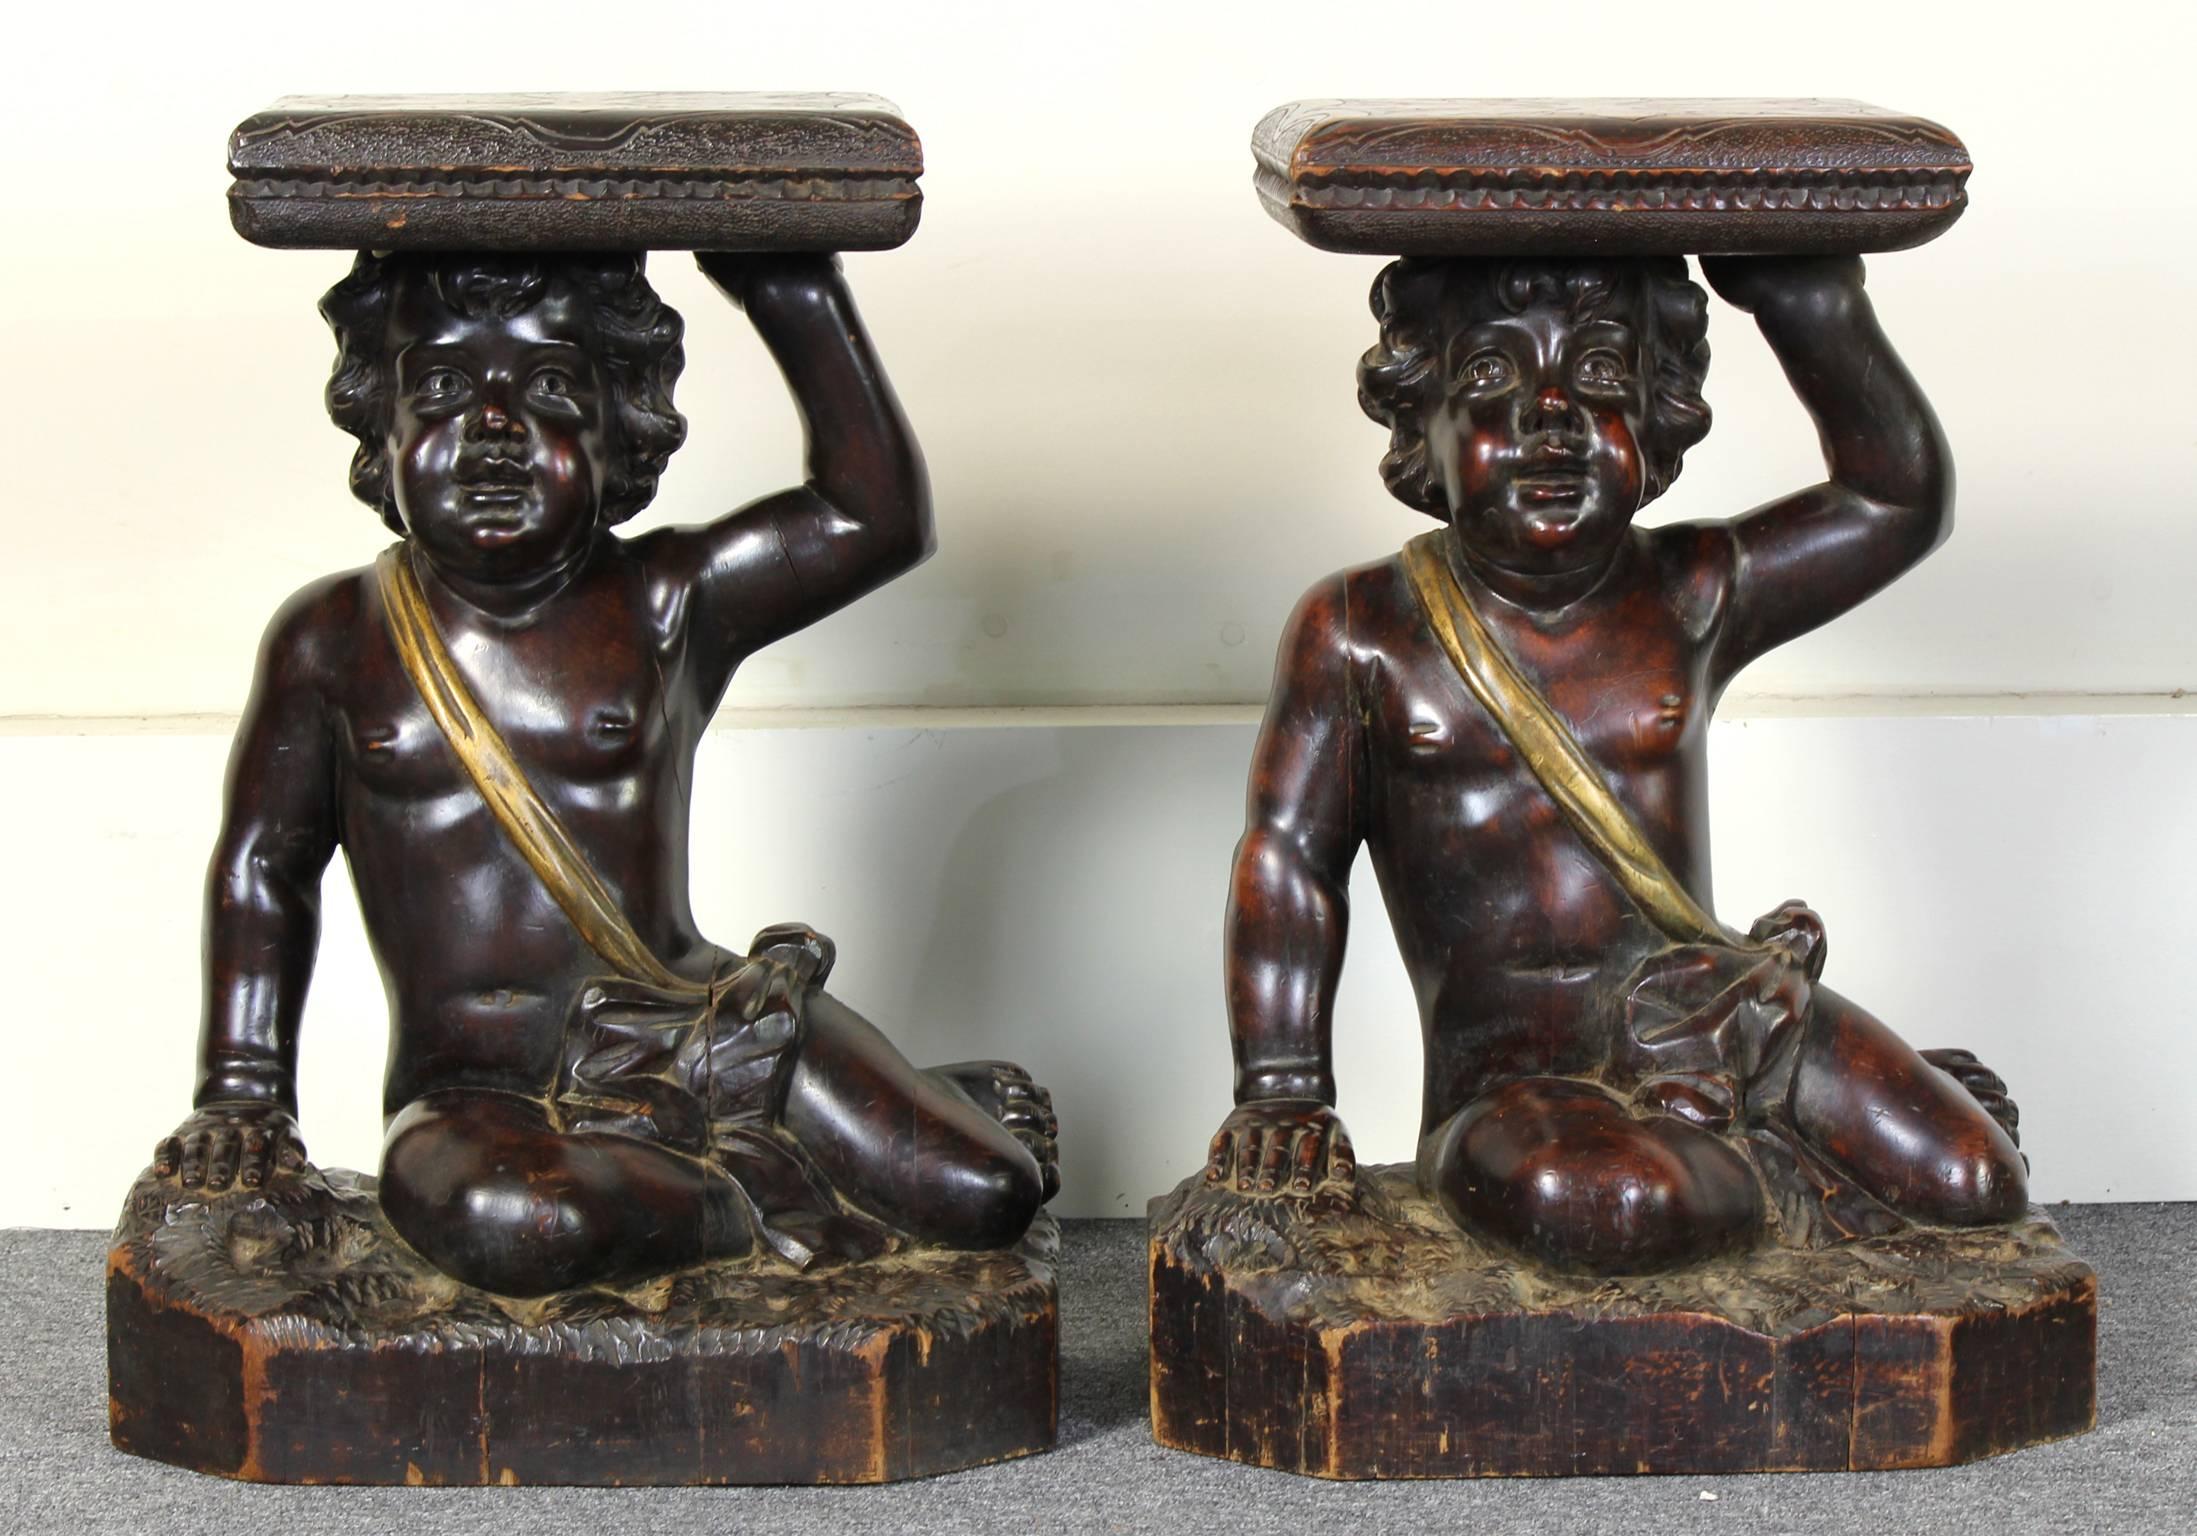 A delightful pair of late 19th C. Italian carved wood side or occasional tables depicting playful cherubs reclining on rocks balancing cushions on their heads. Each piece is unique and charming.  